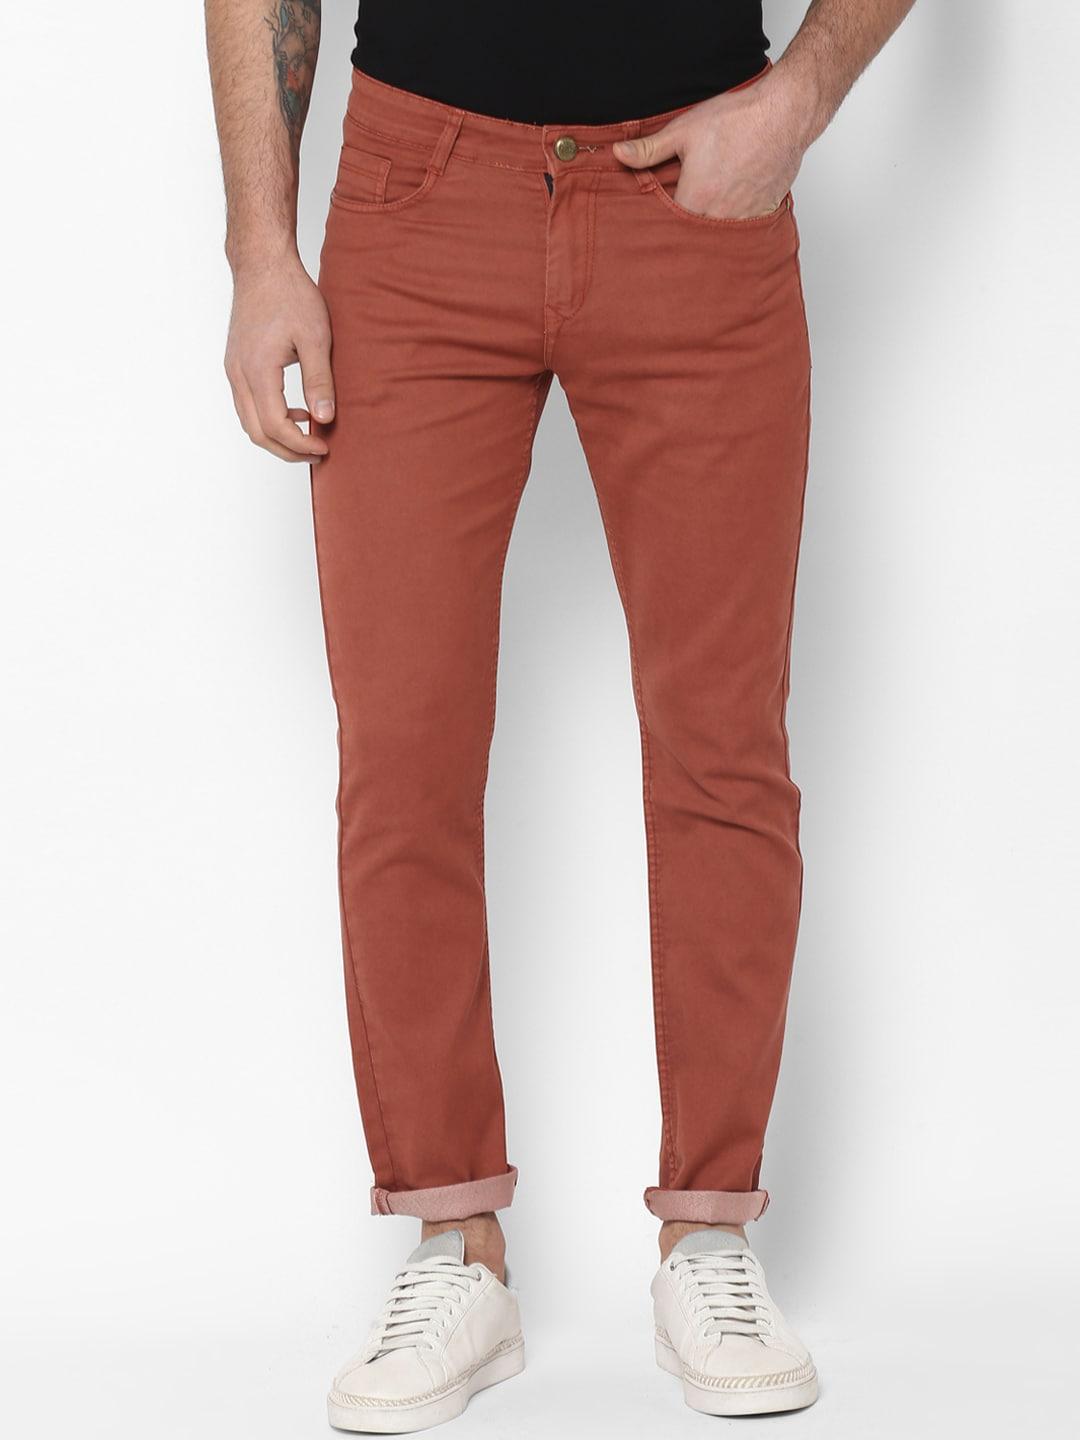 urbano-fashion-men-rust-brown-slim-fit-mid-rise-clean-look-stretchable-jeans